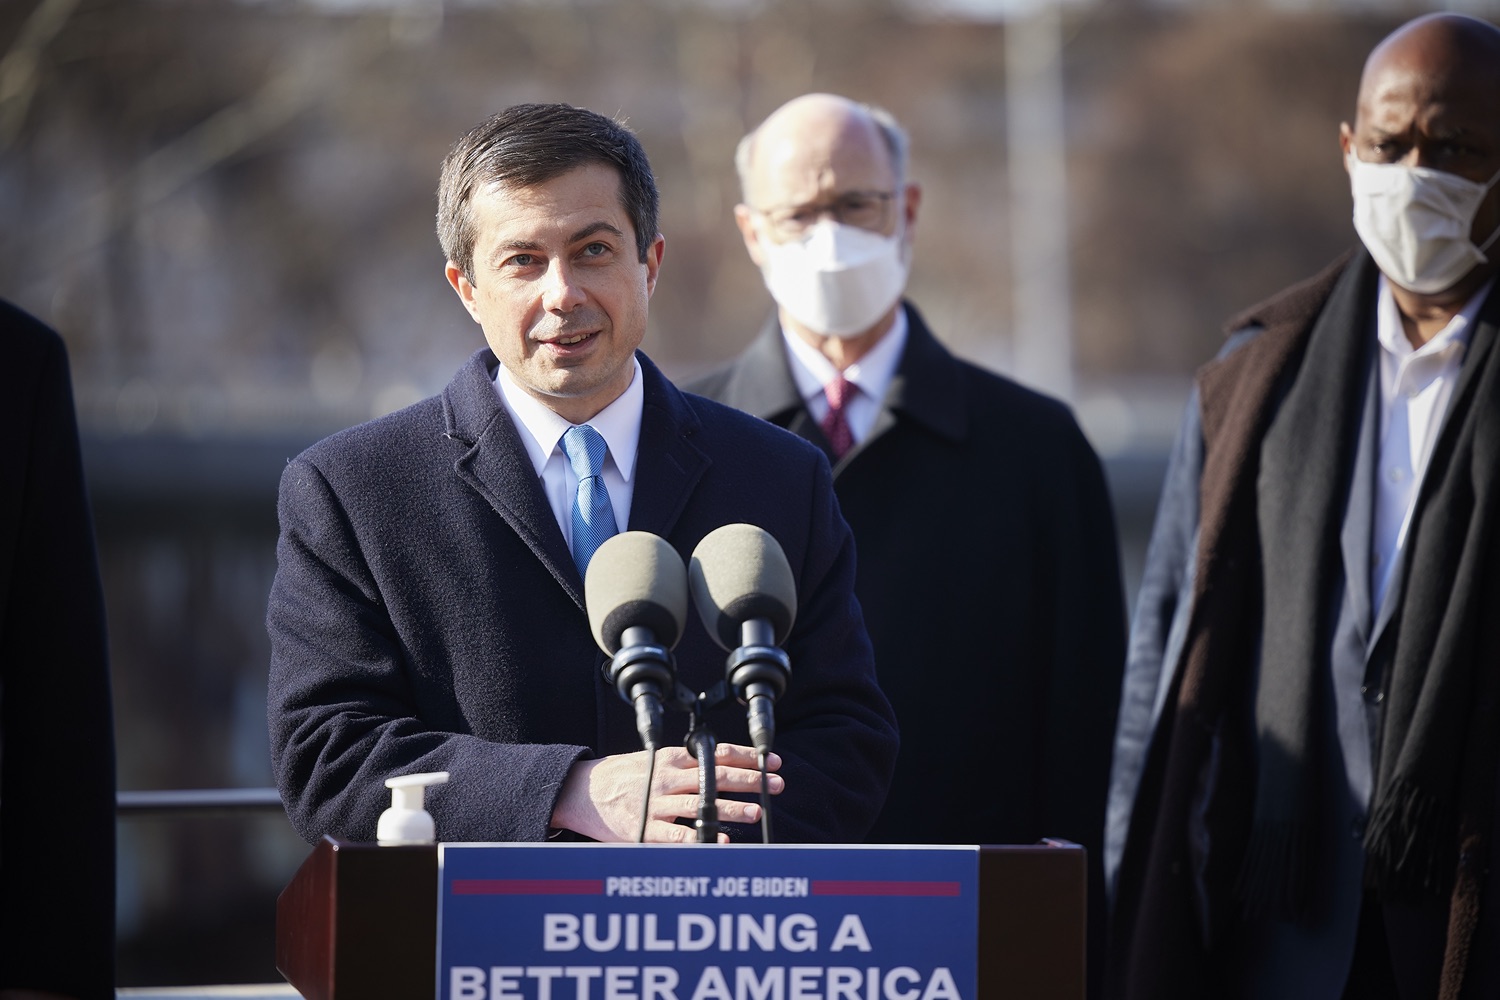 Pete Buttigieg, U.S. Secretary of Transportation speaks with the press.  Governor Tom Wolf stood alongside U.S. Transportation Secretary Pete Buttigieg to launch the largest bridge formula program in American history, made possible by the passage of the Bipartisan Infrastructure Law. Pennsylvania is set to receive $1.6 billion to fix more than 3,000 bridges across the commonwealth.  Philadelphia, PA  January 14, 2021<br><a href="https://filesource.amperwave.net/commonwealthofpa/photo/20426_gov_bridgeAnnoucement_dz_016_copy.jpg" target="_blank">⇣ Download Photo</a>